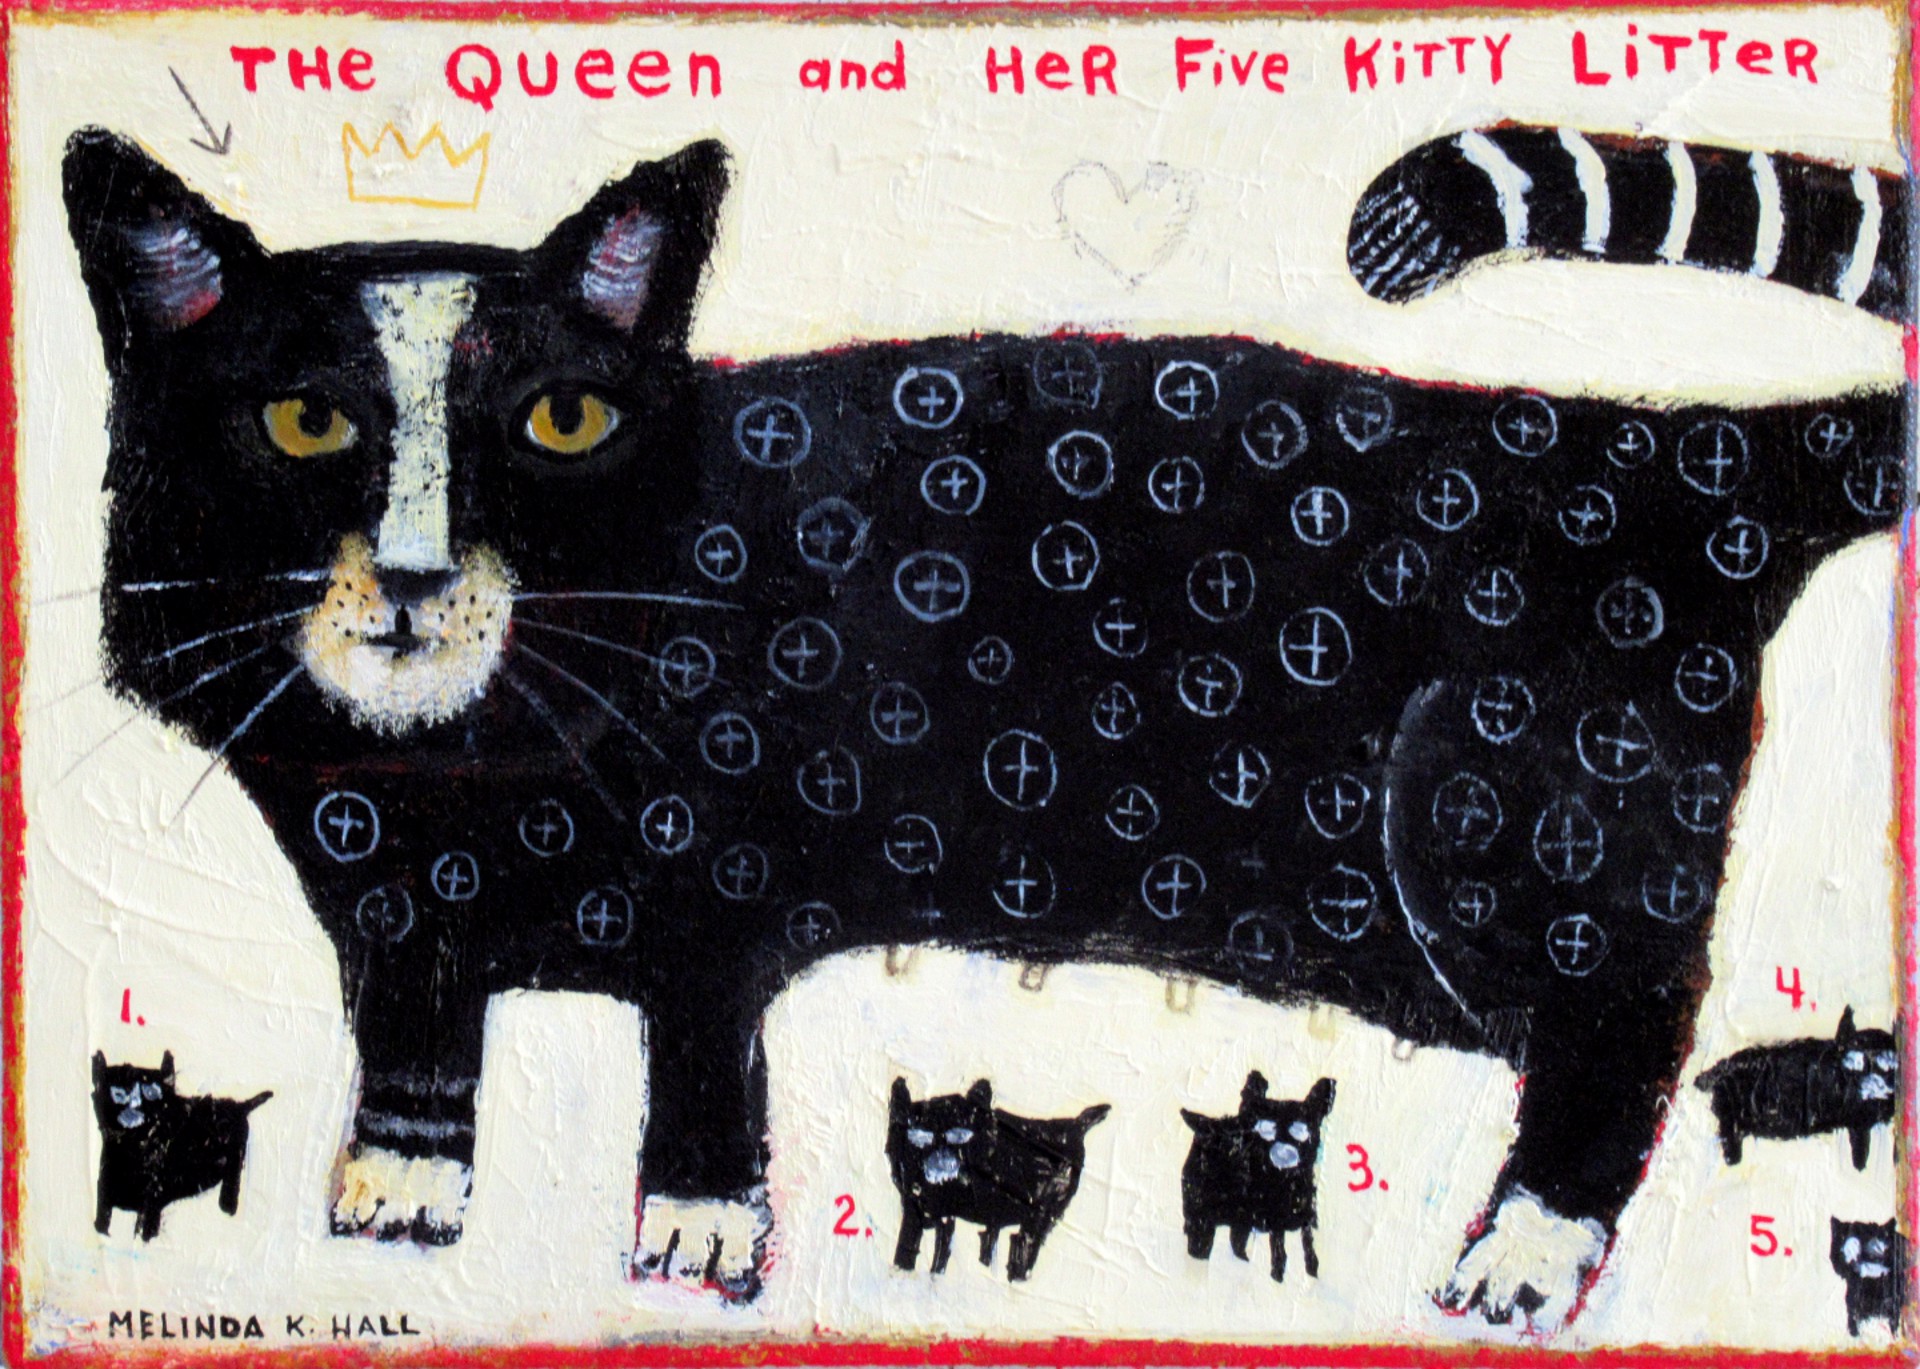 The Queen and Her Five Kitty Litter by Melinda K. Hall